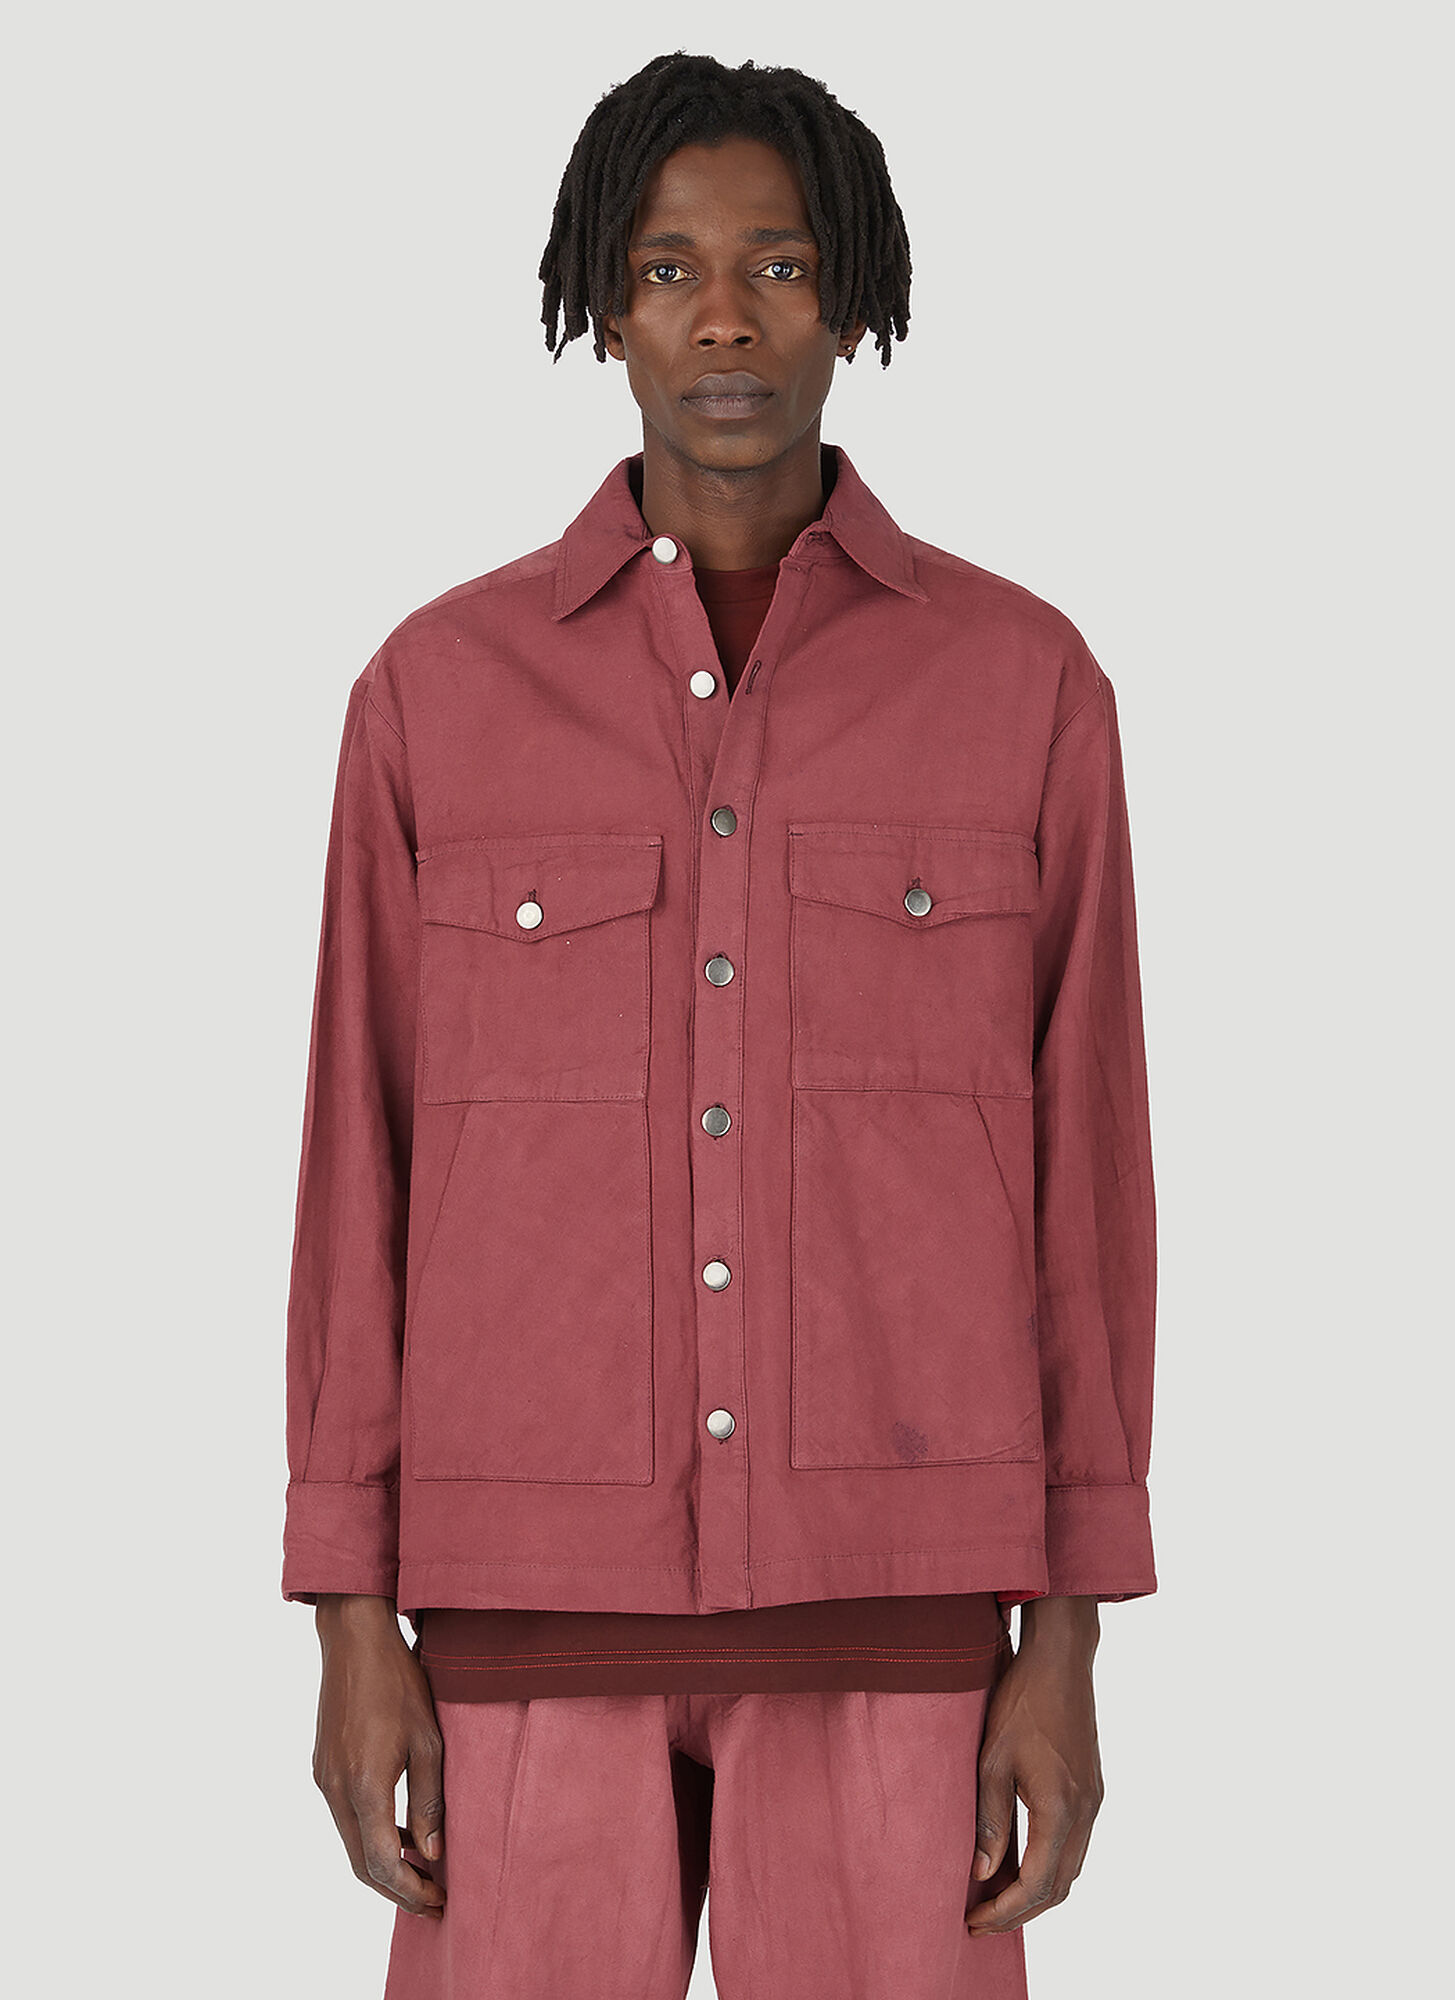 Alive & More Buttoned Overshirt Jacket